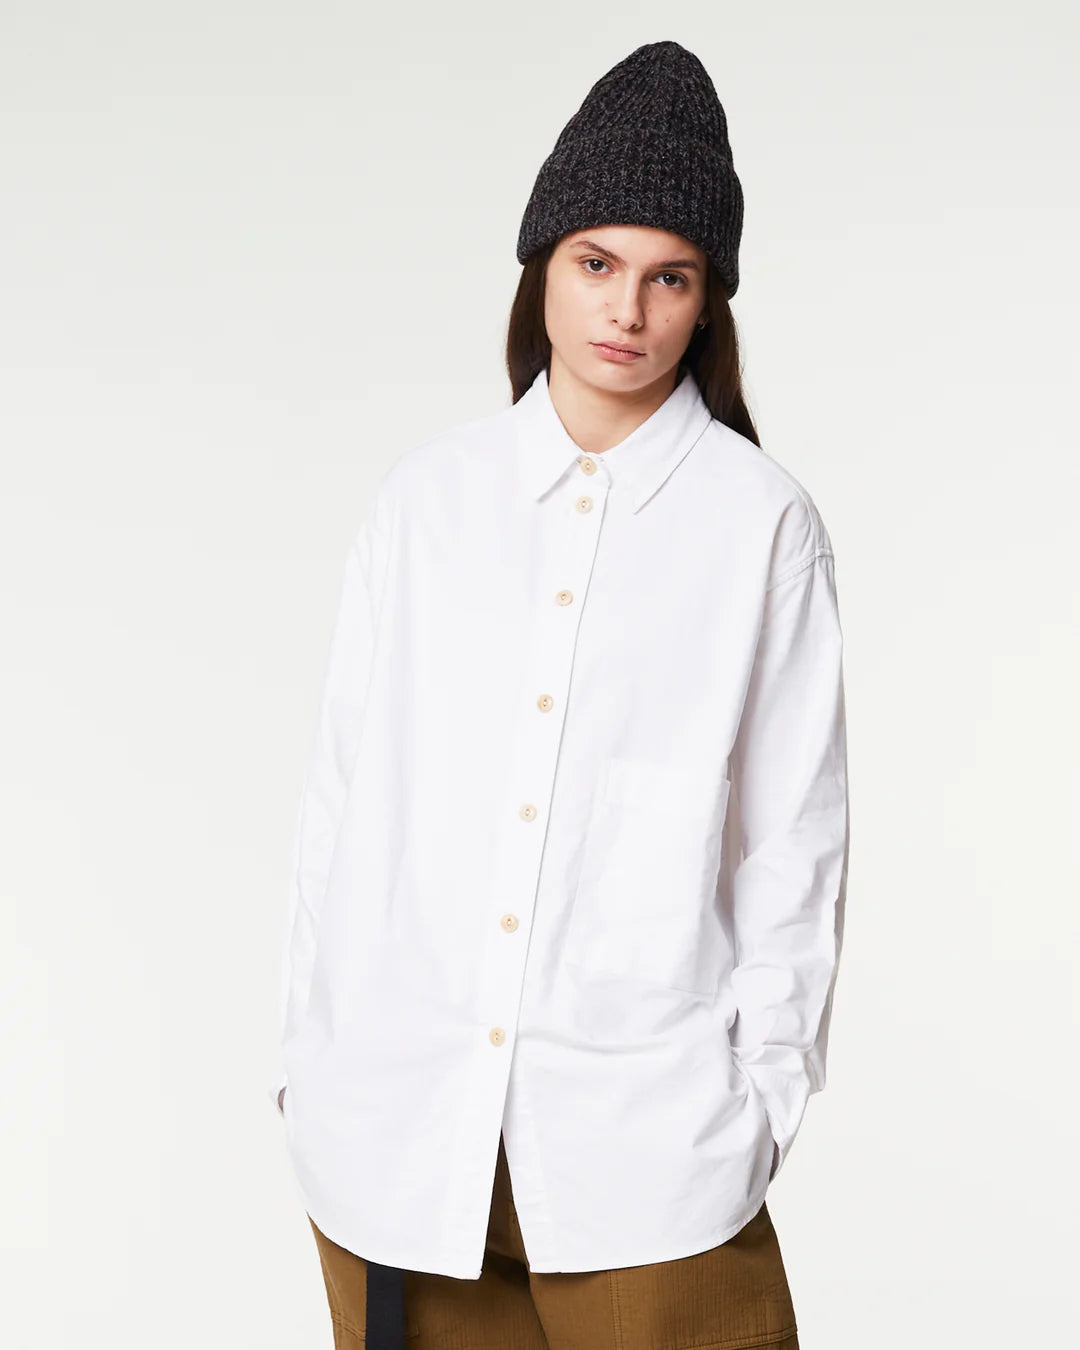 Create Your Own Women's Oxford Shirt